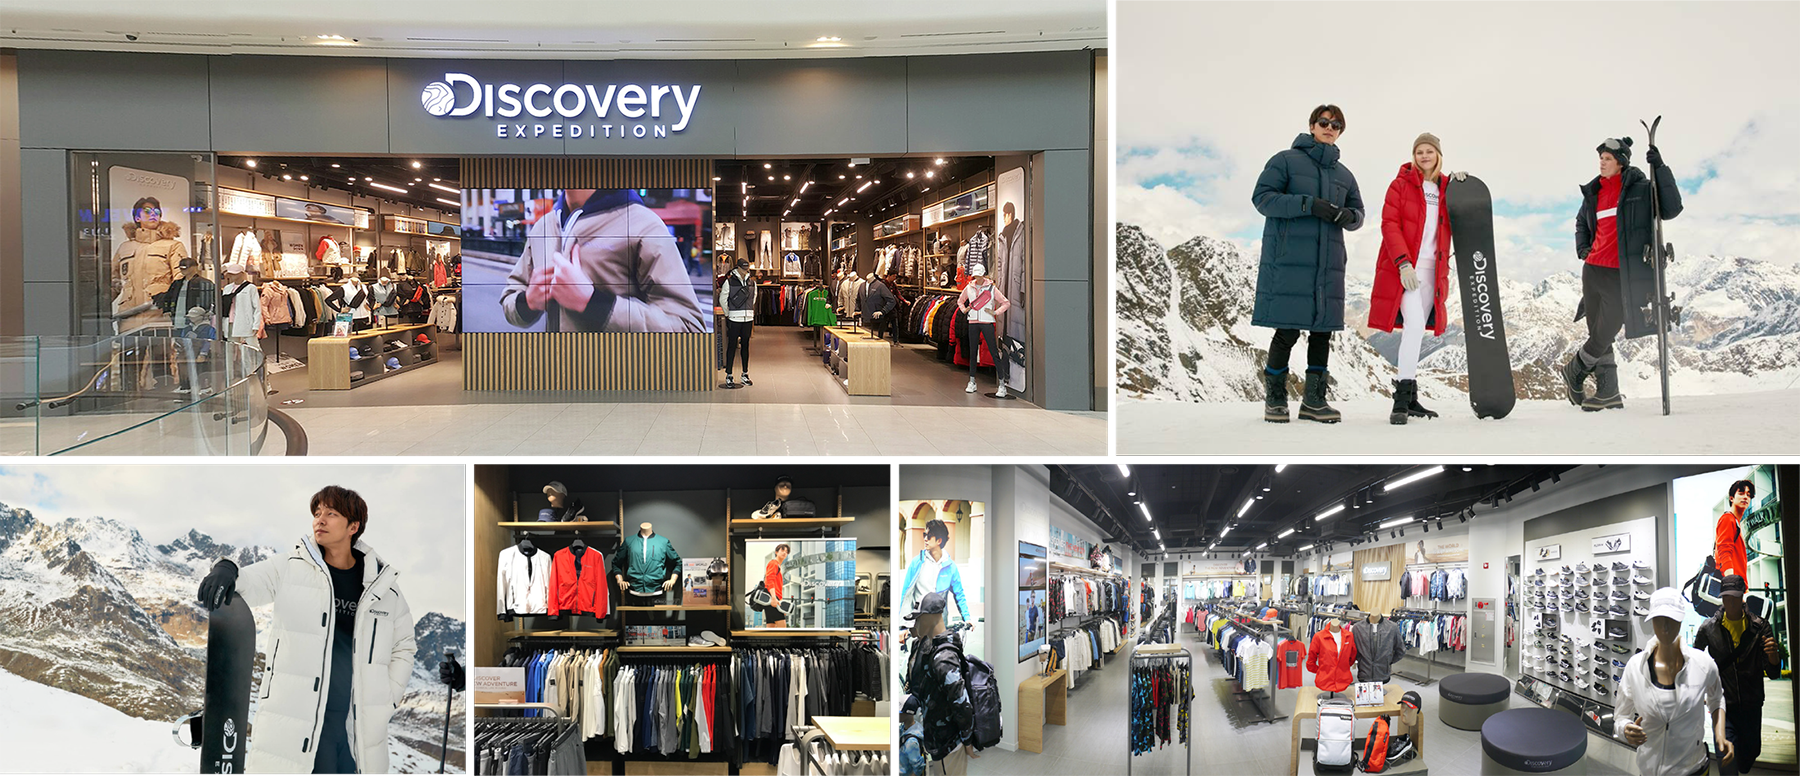 Discovery Expedition Store Experience Layout